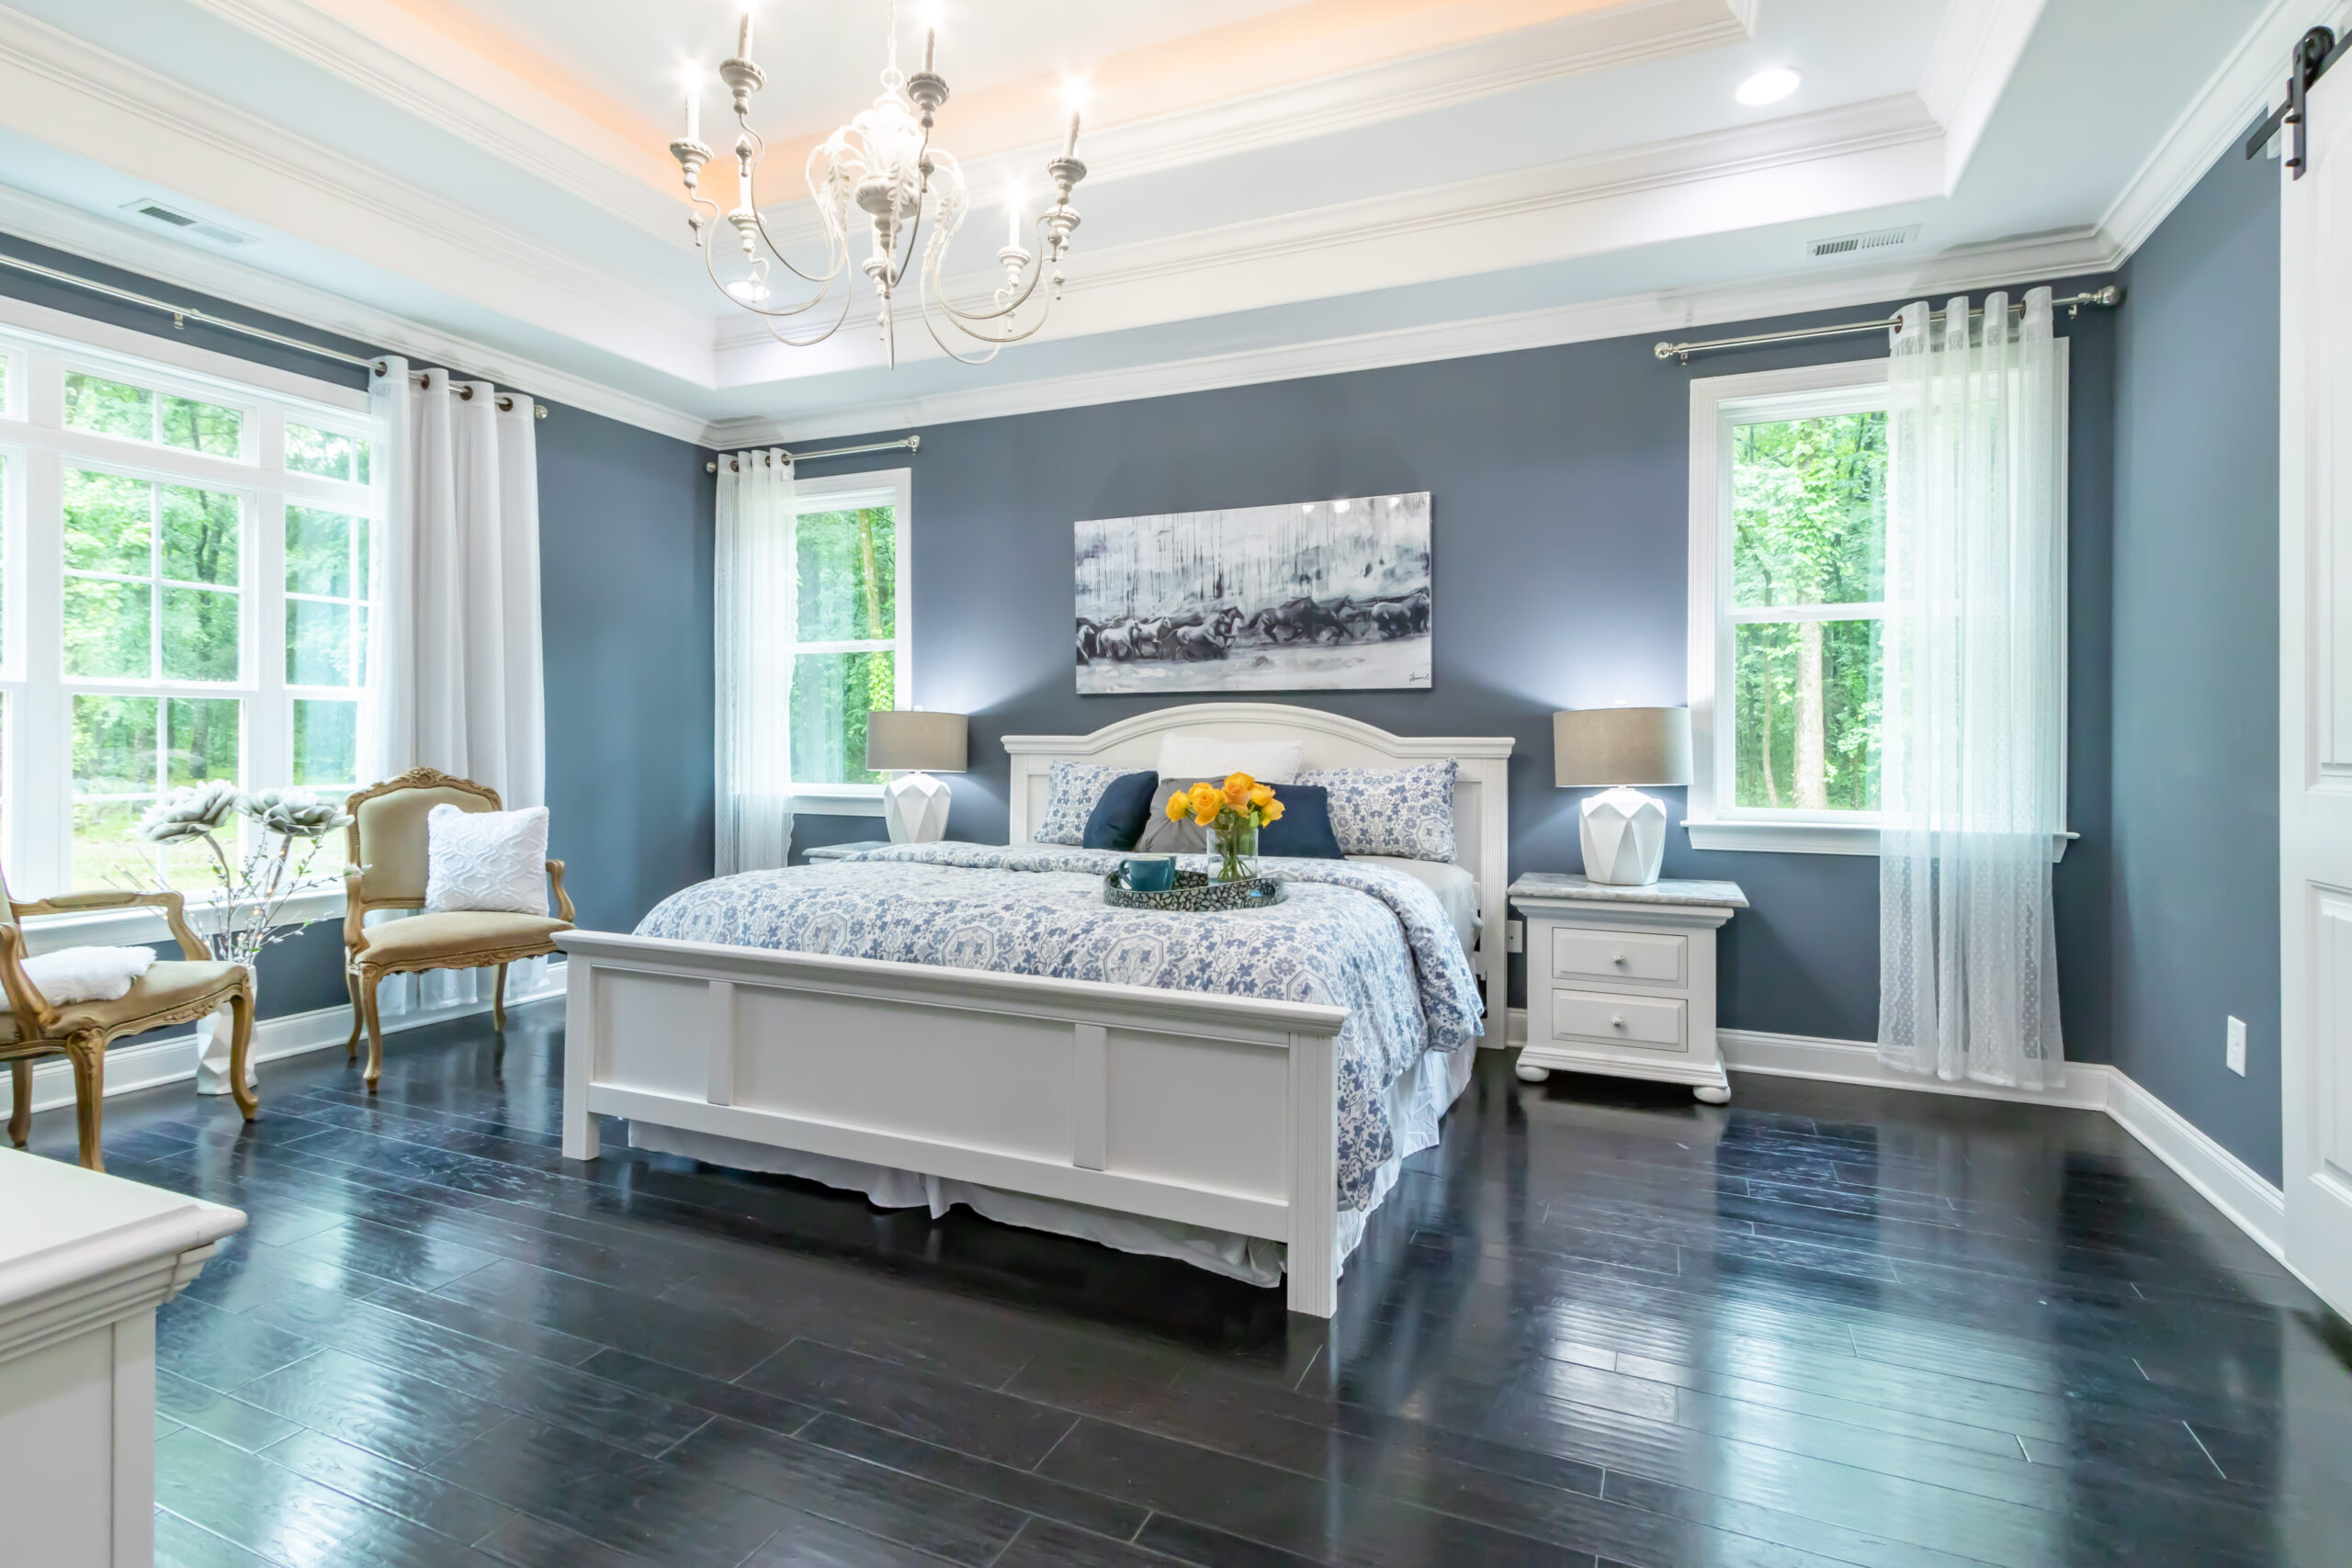 Beautiful interior design of bedroom with painted light grey walls - article decoding common paint terms.